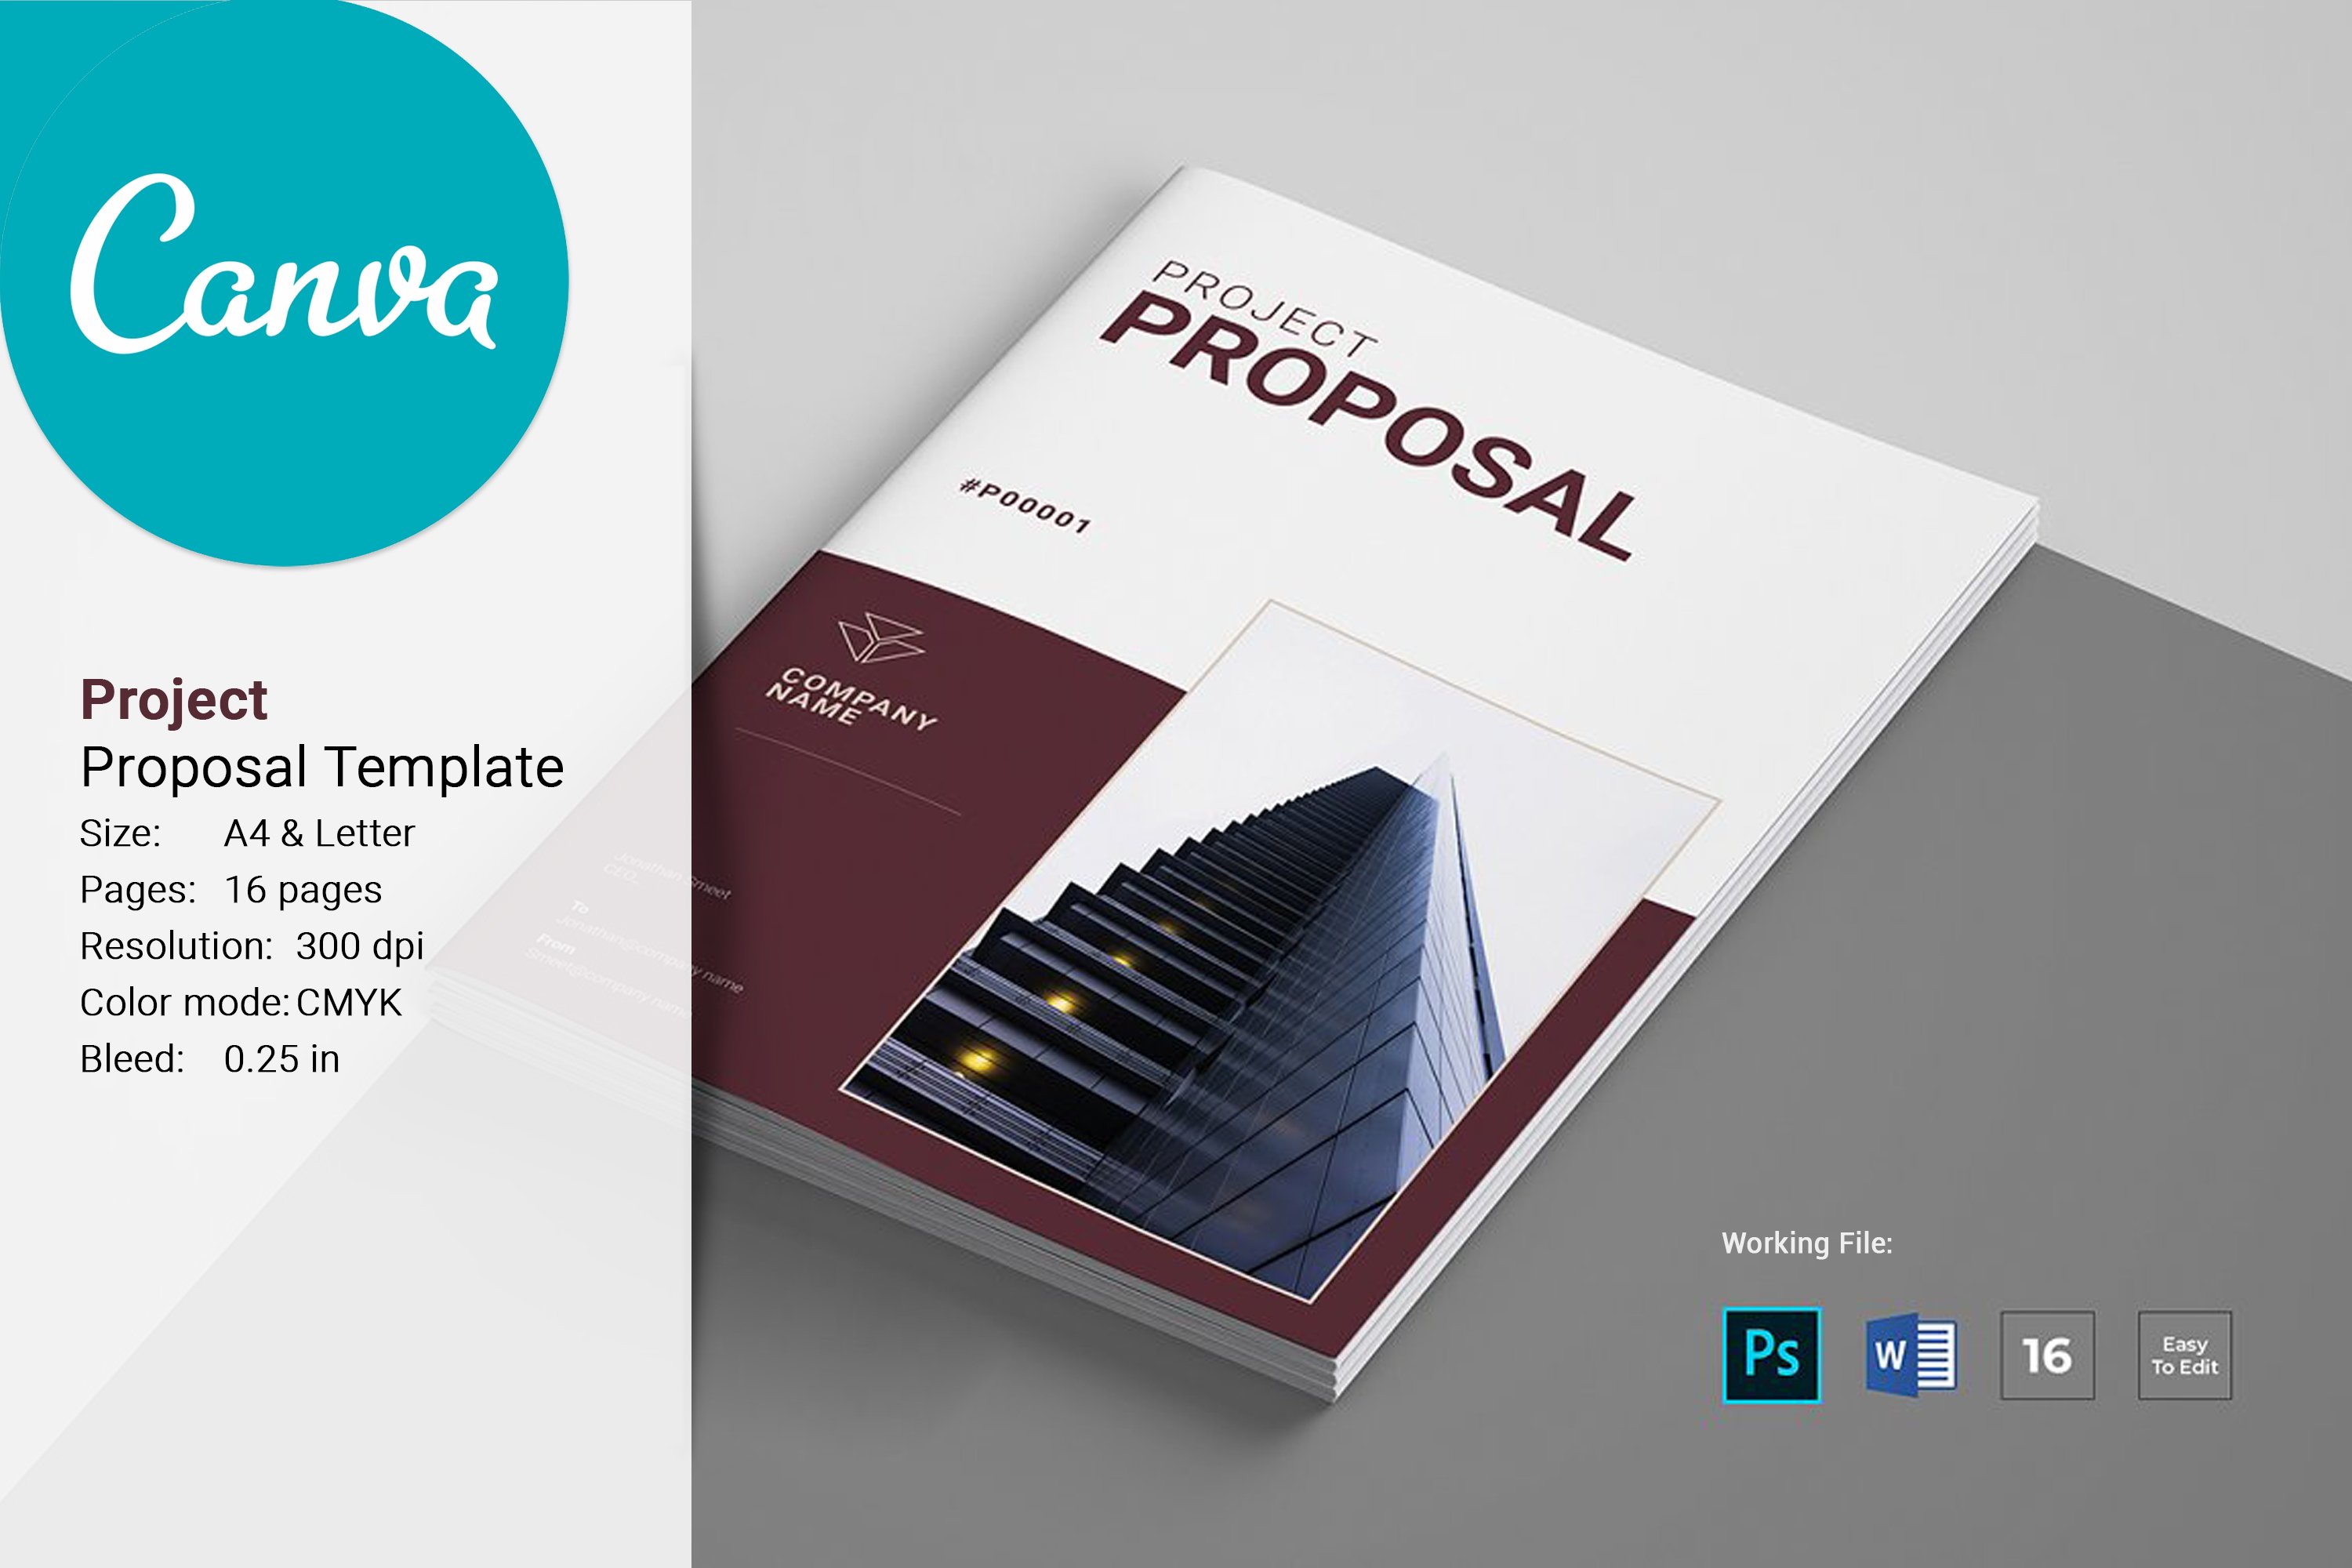 Proposal Brochure Template cover image.